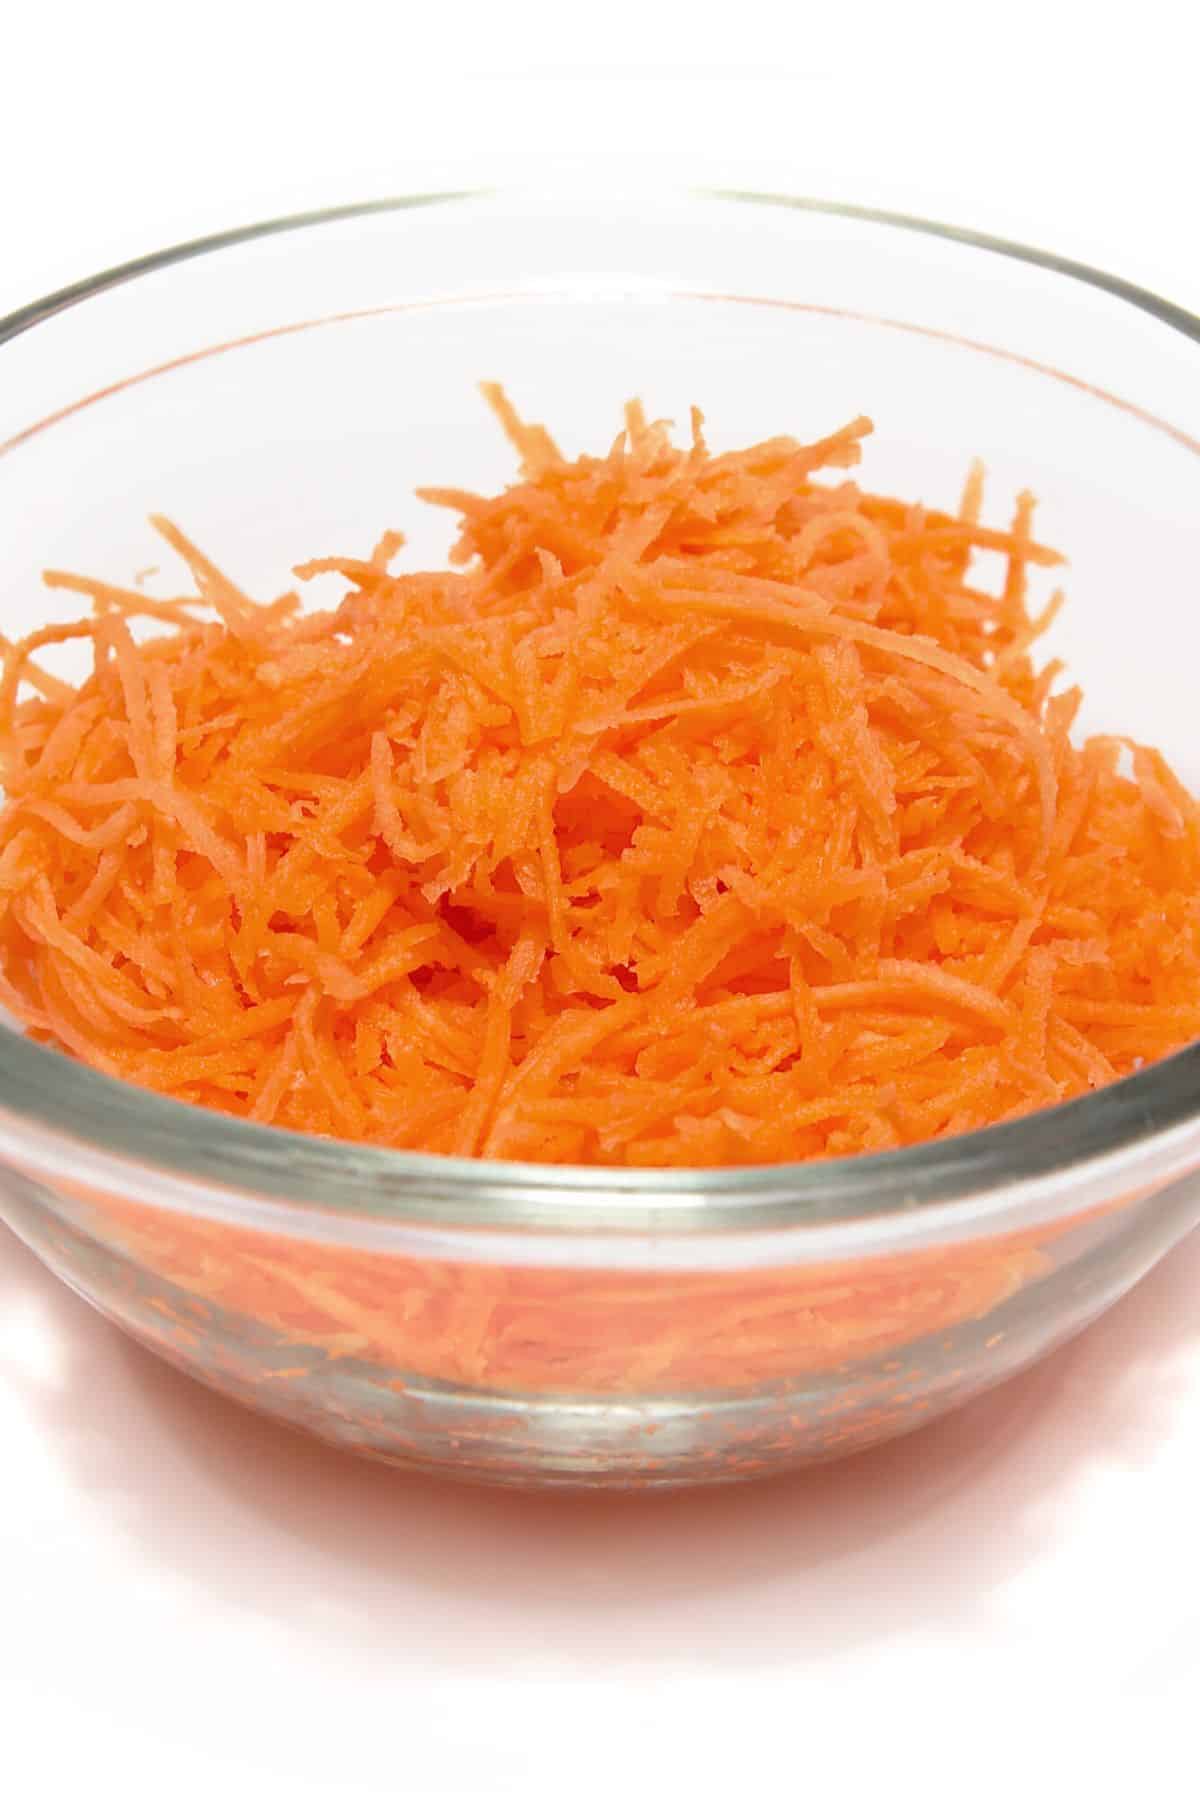 A small glass bowl of freshly grated carrot.